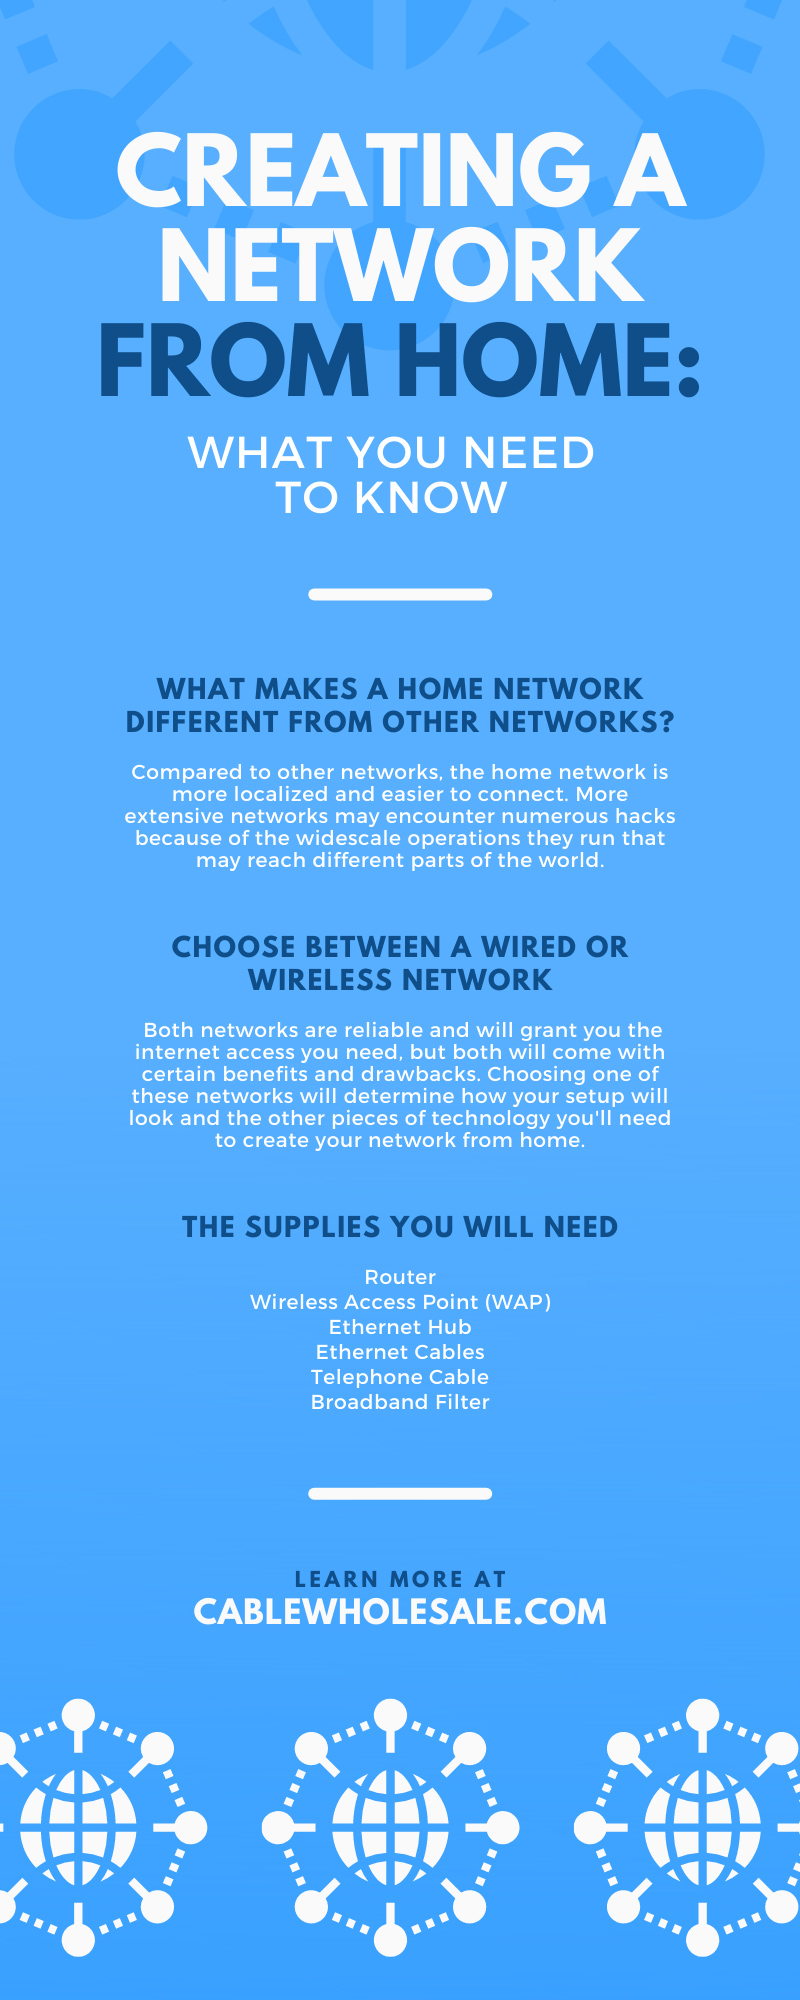 Creating a Network From Home: What You Need To Know